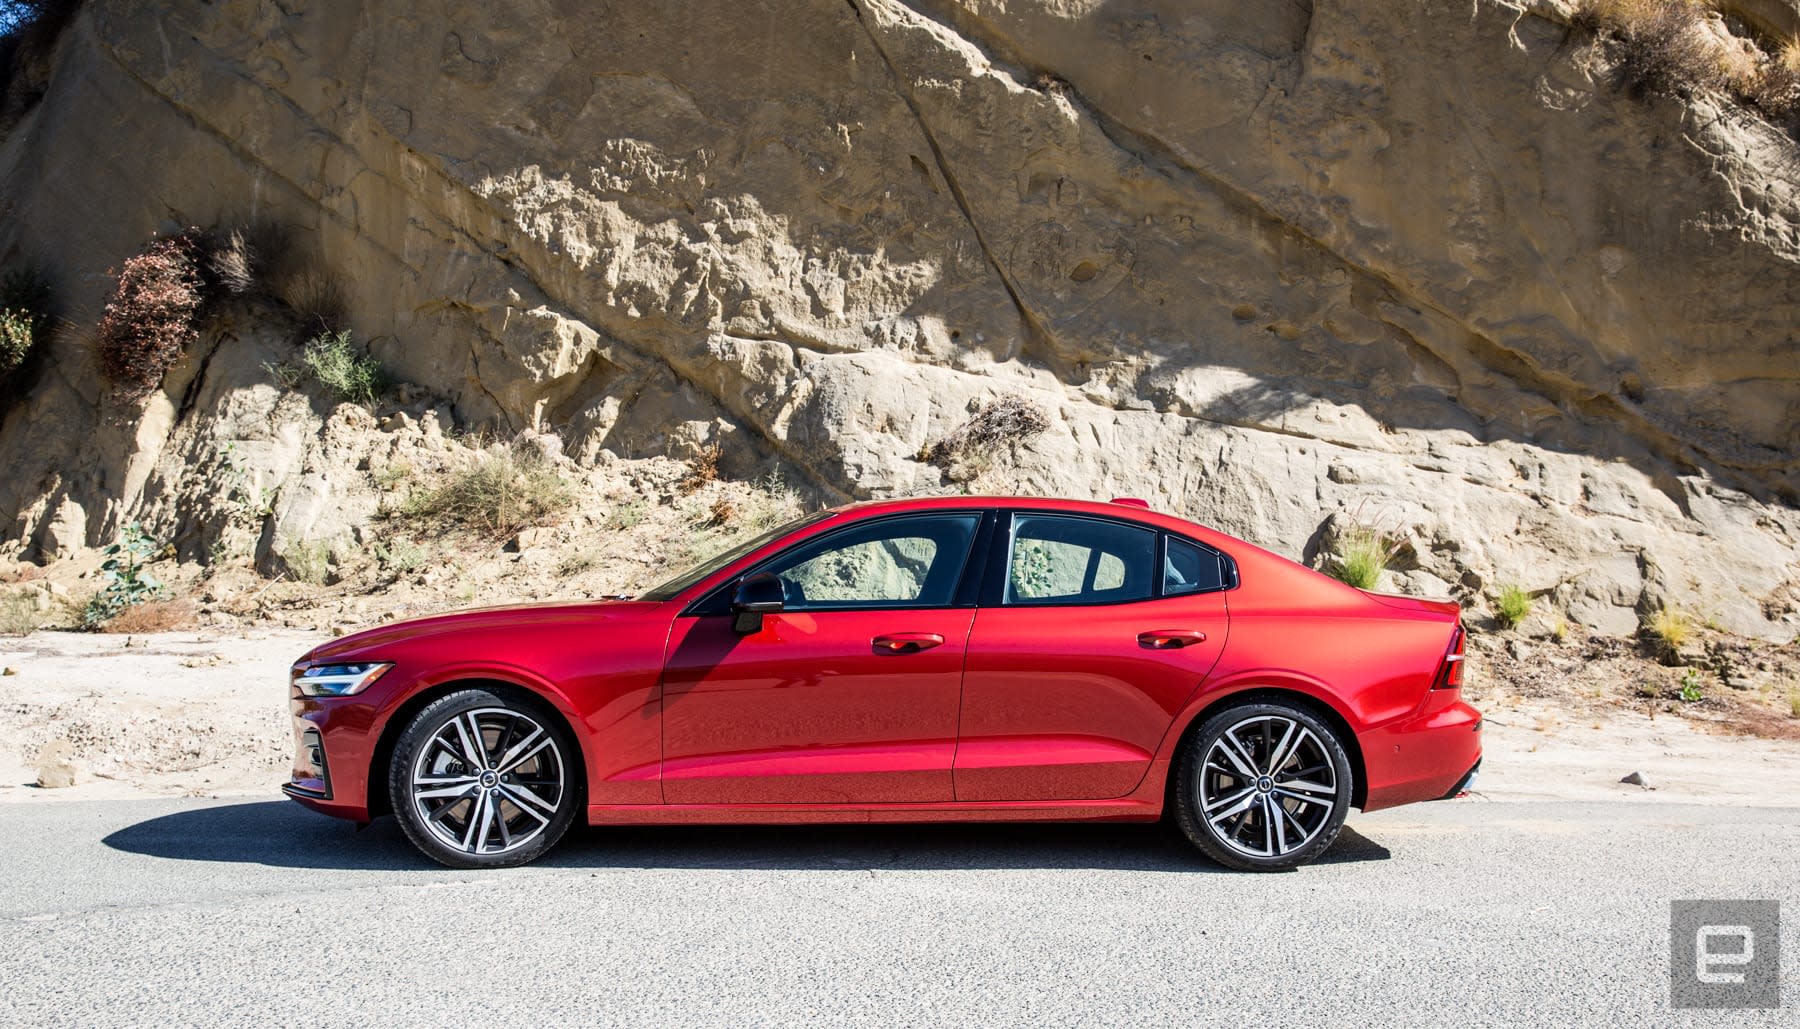 volvo surprises with its stylish and quick s60 sedan